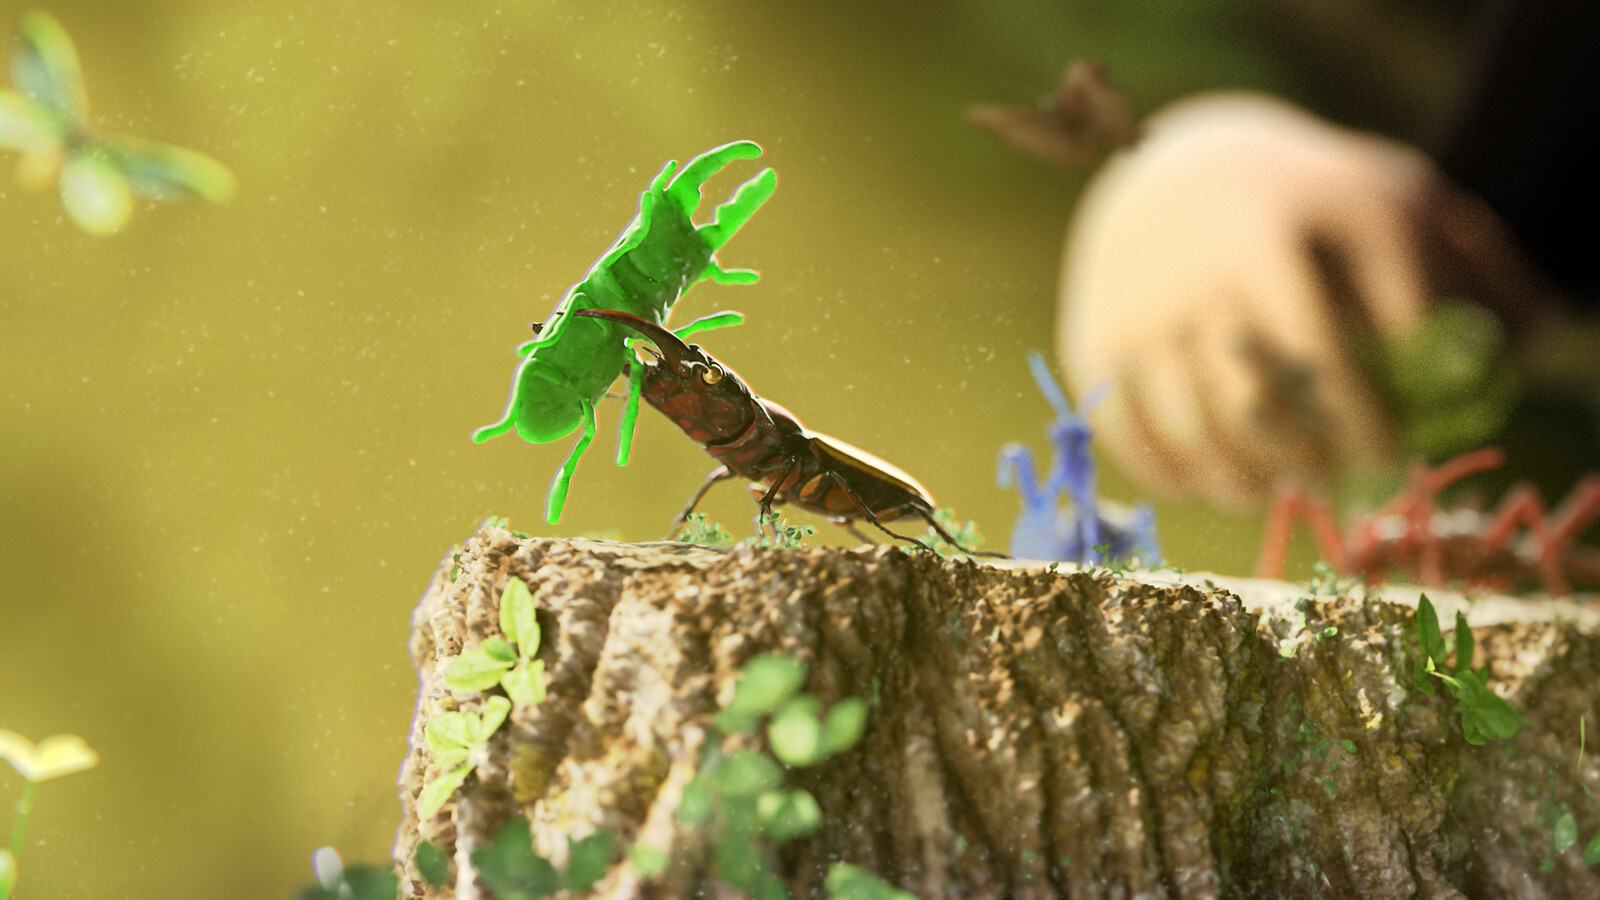 "King of The Stump" - Art of 3D Insects Challenge